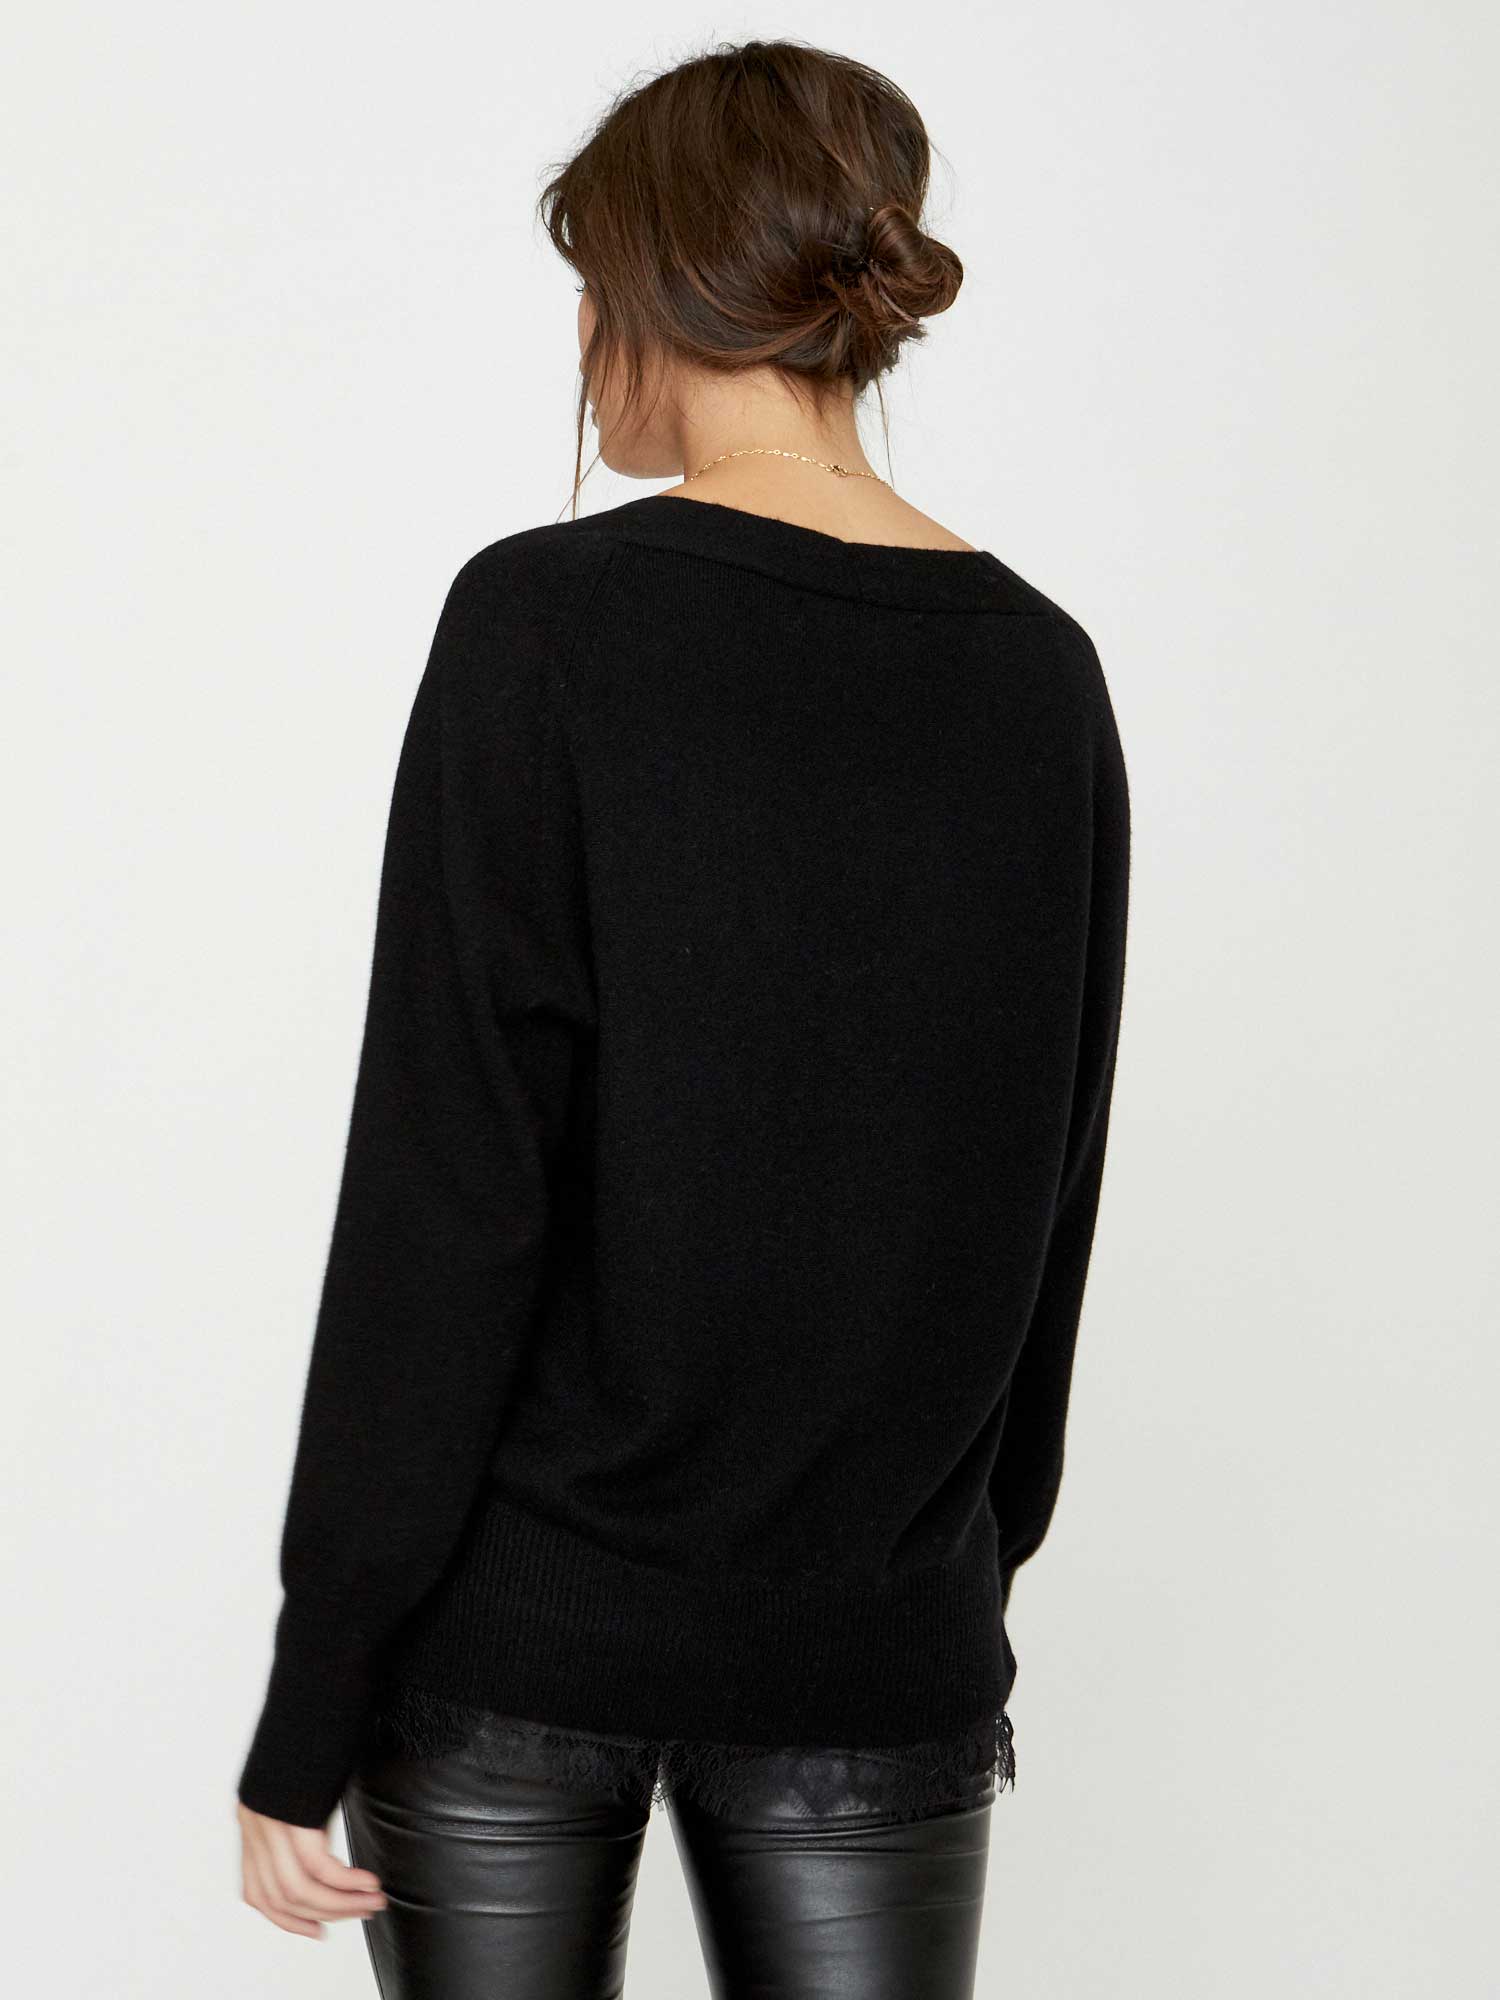 The Lace Vee Looker Pullover